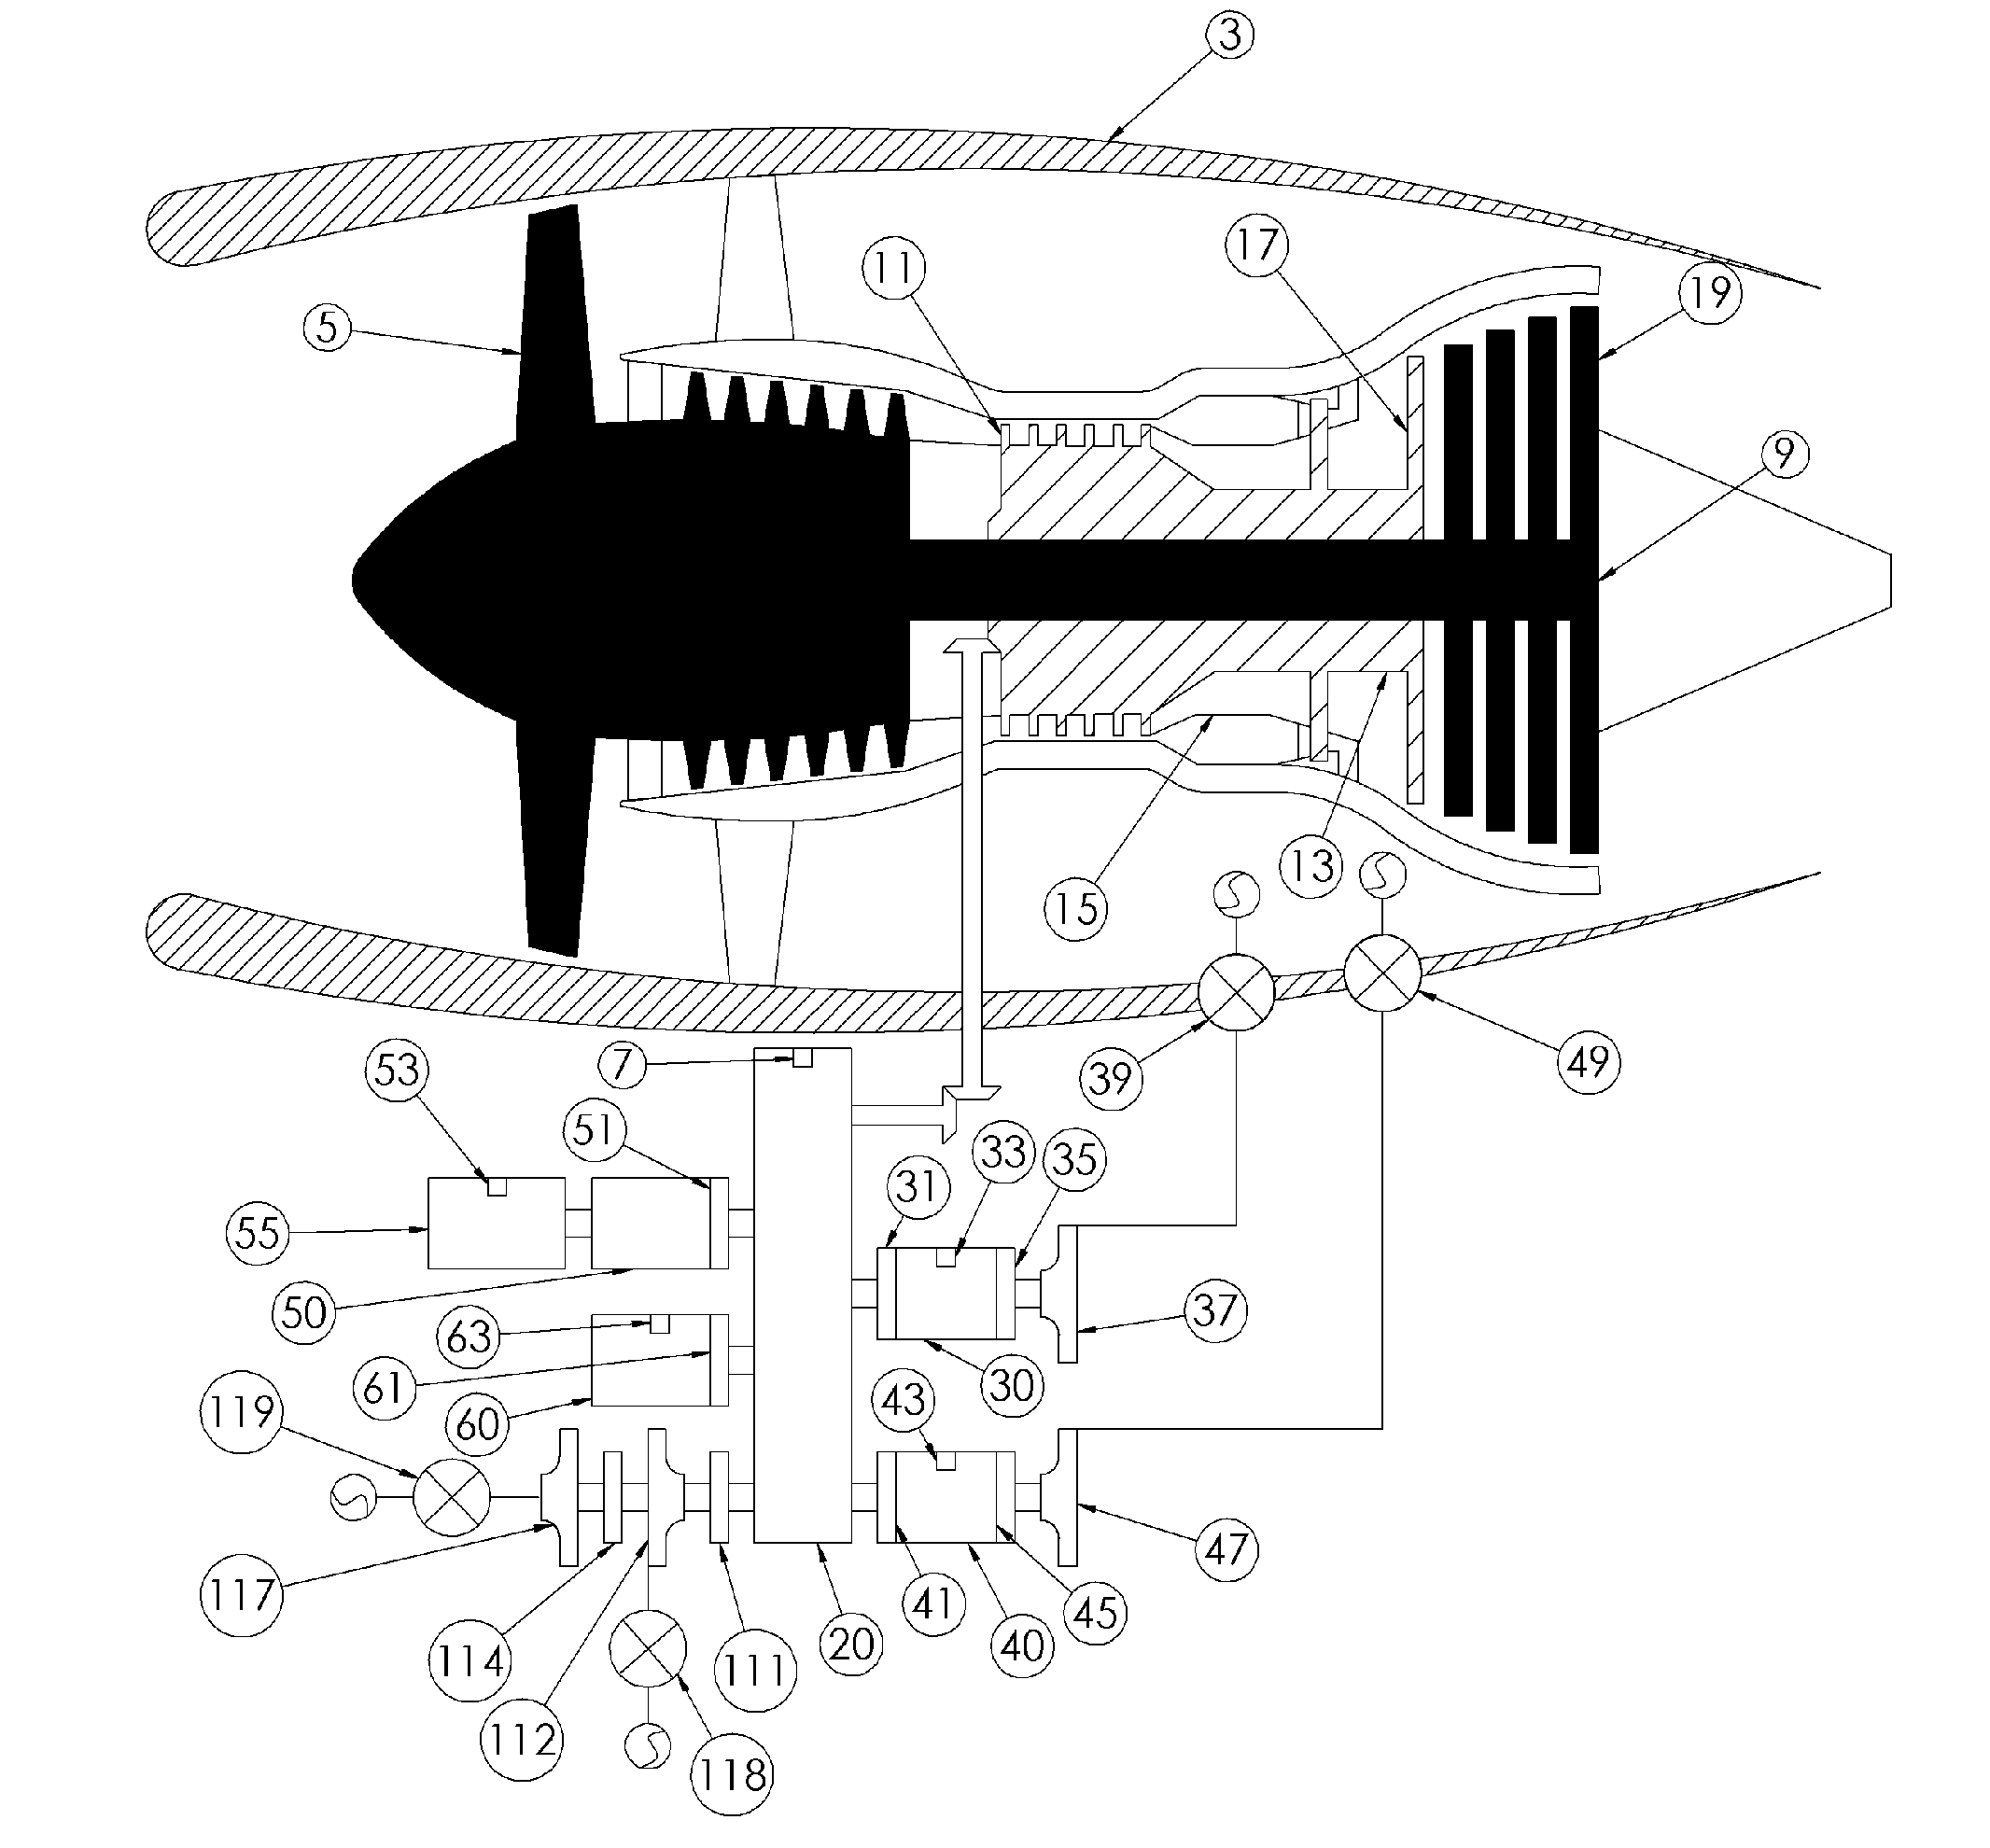 Aircraft with disengageable engine and auxiliary power unit components